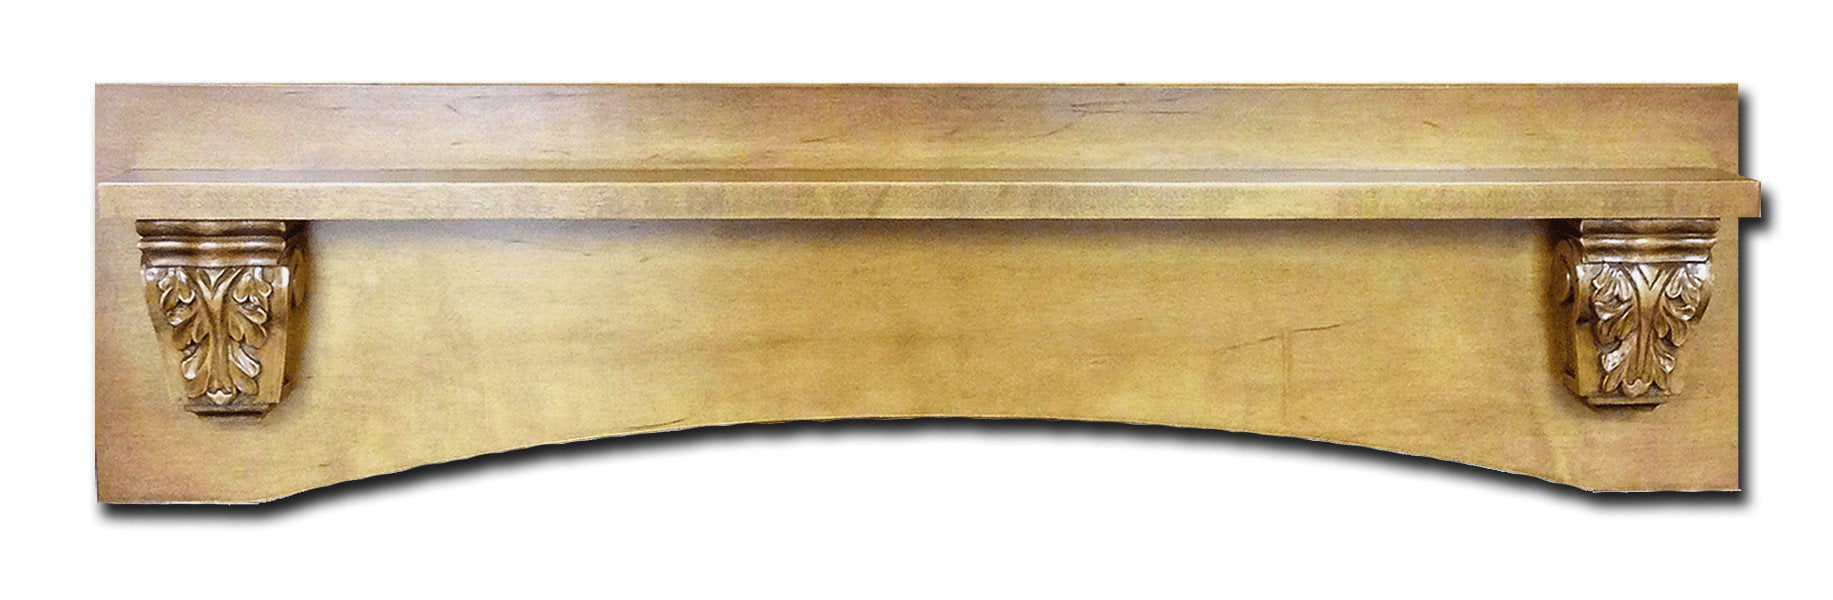 Castlewood SY-VA-6051-36 Arched Valance